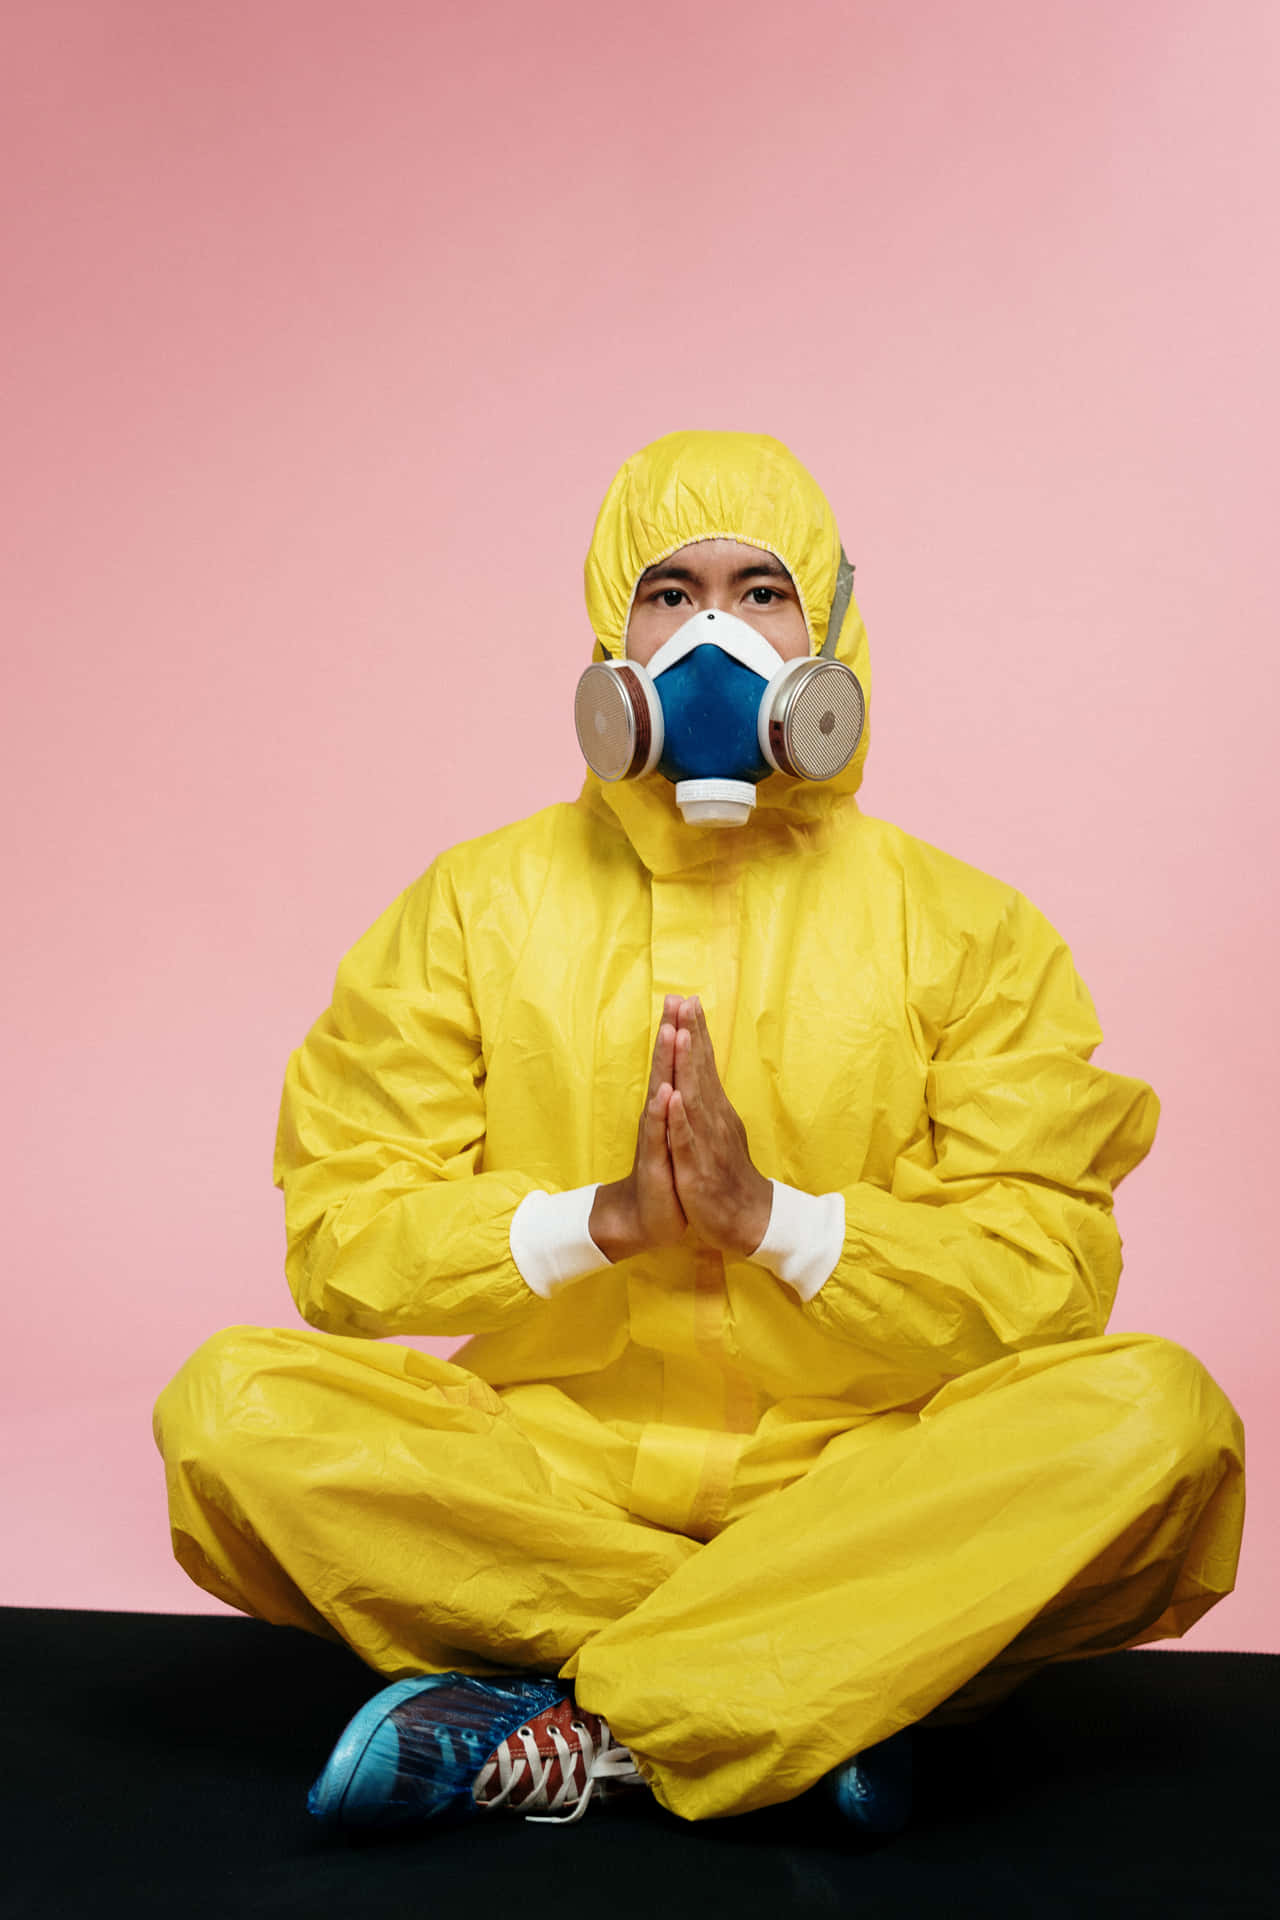 Ironic Image Of A Man With Yellow Suit And Mask Wallpaper